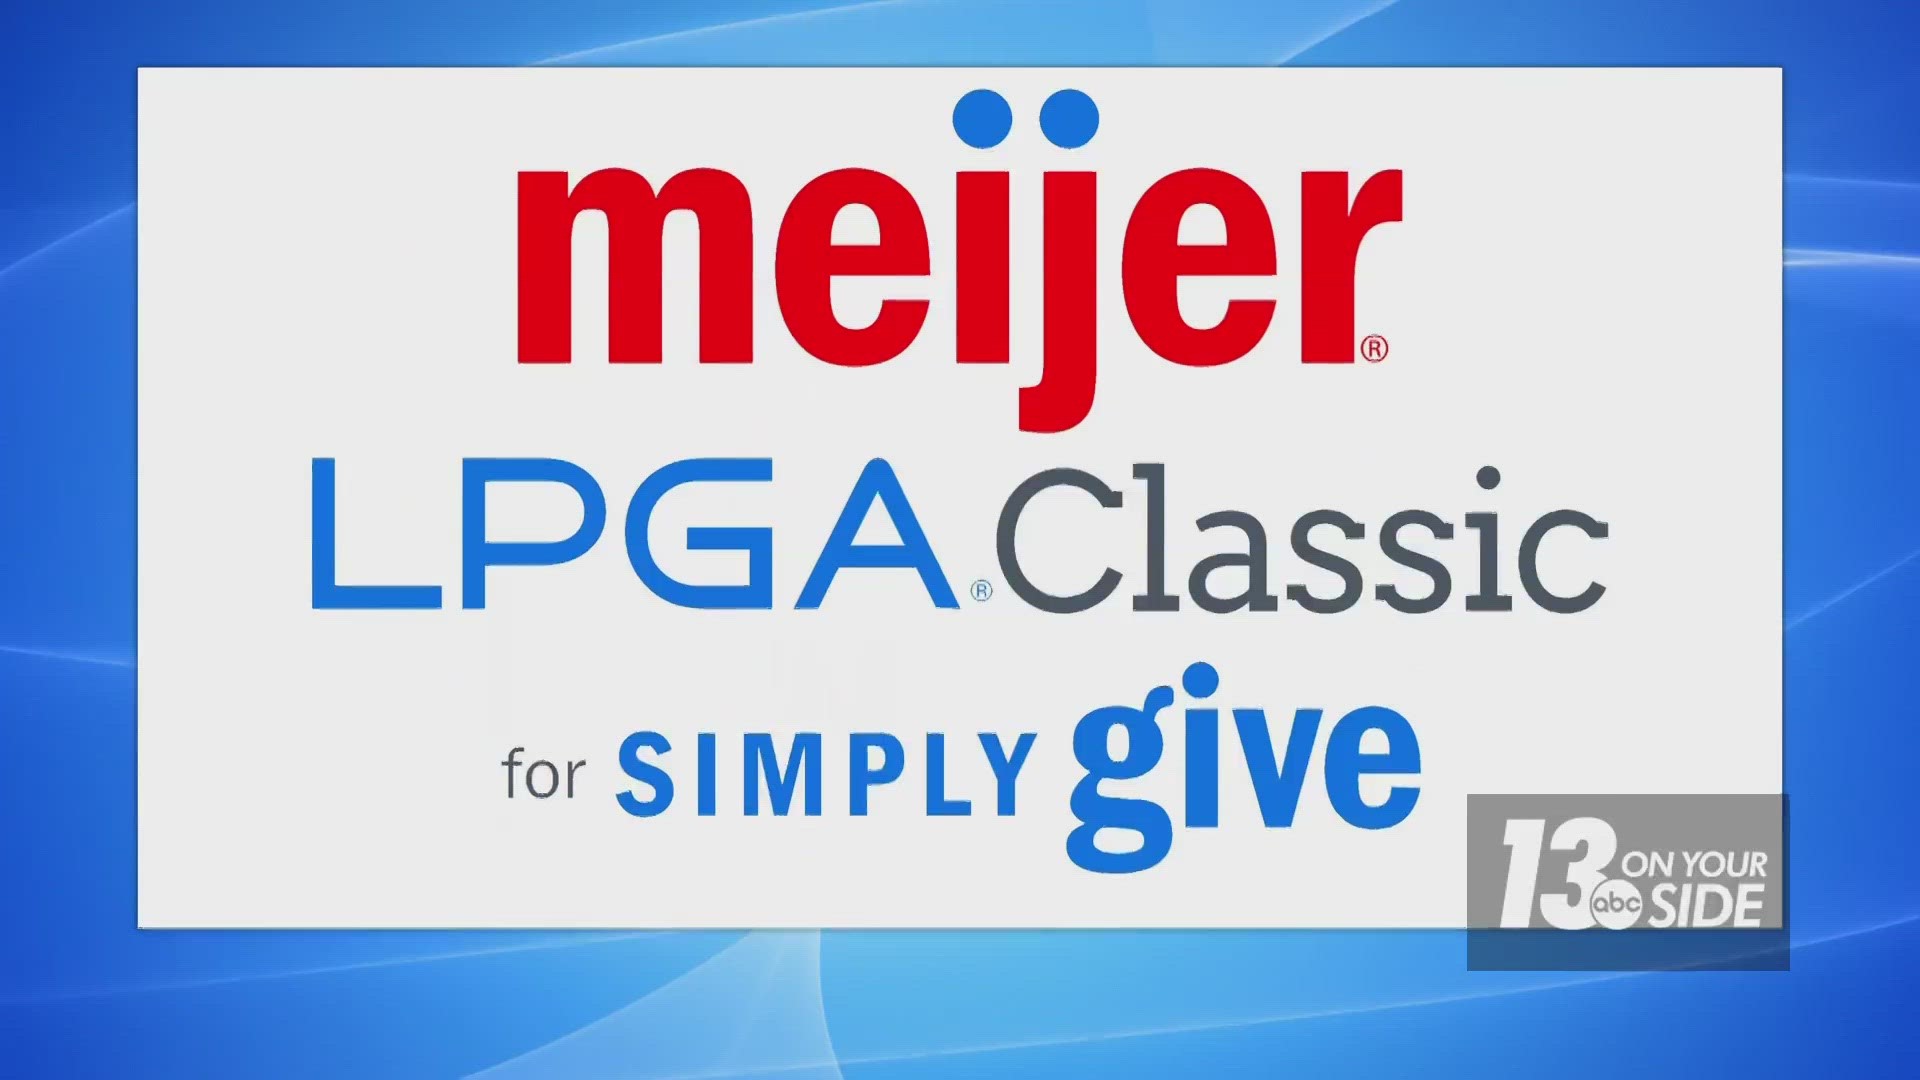 Proceeds from the event go to Simply Give, a Meijer project that re-stocks area pantry shelves and helps feed people who are struggling.